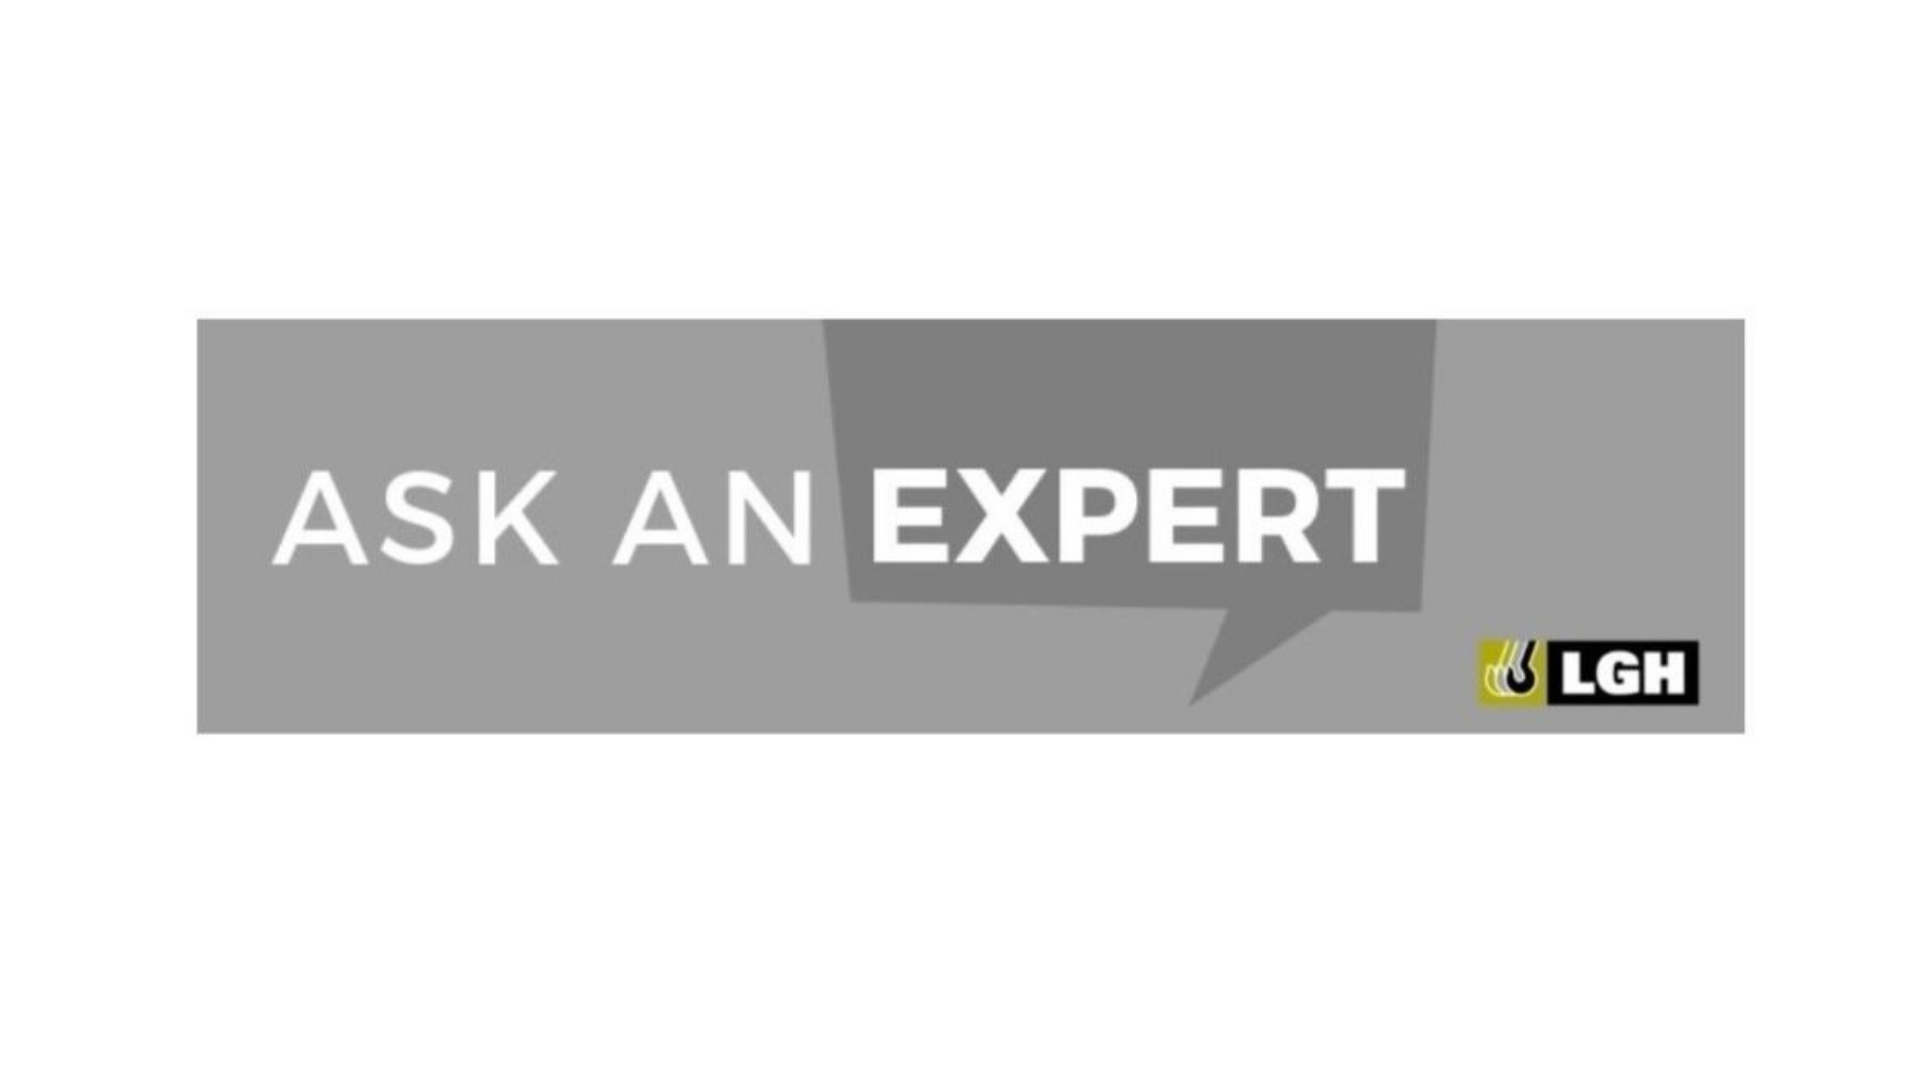 ask the expert|LGH 1970|